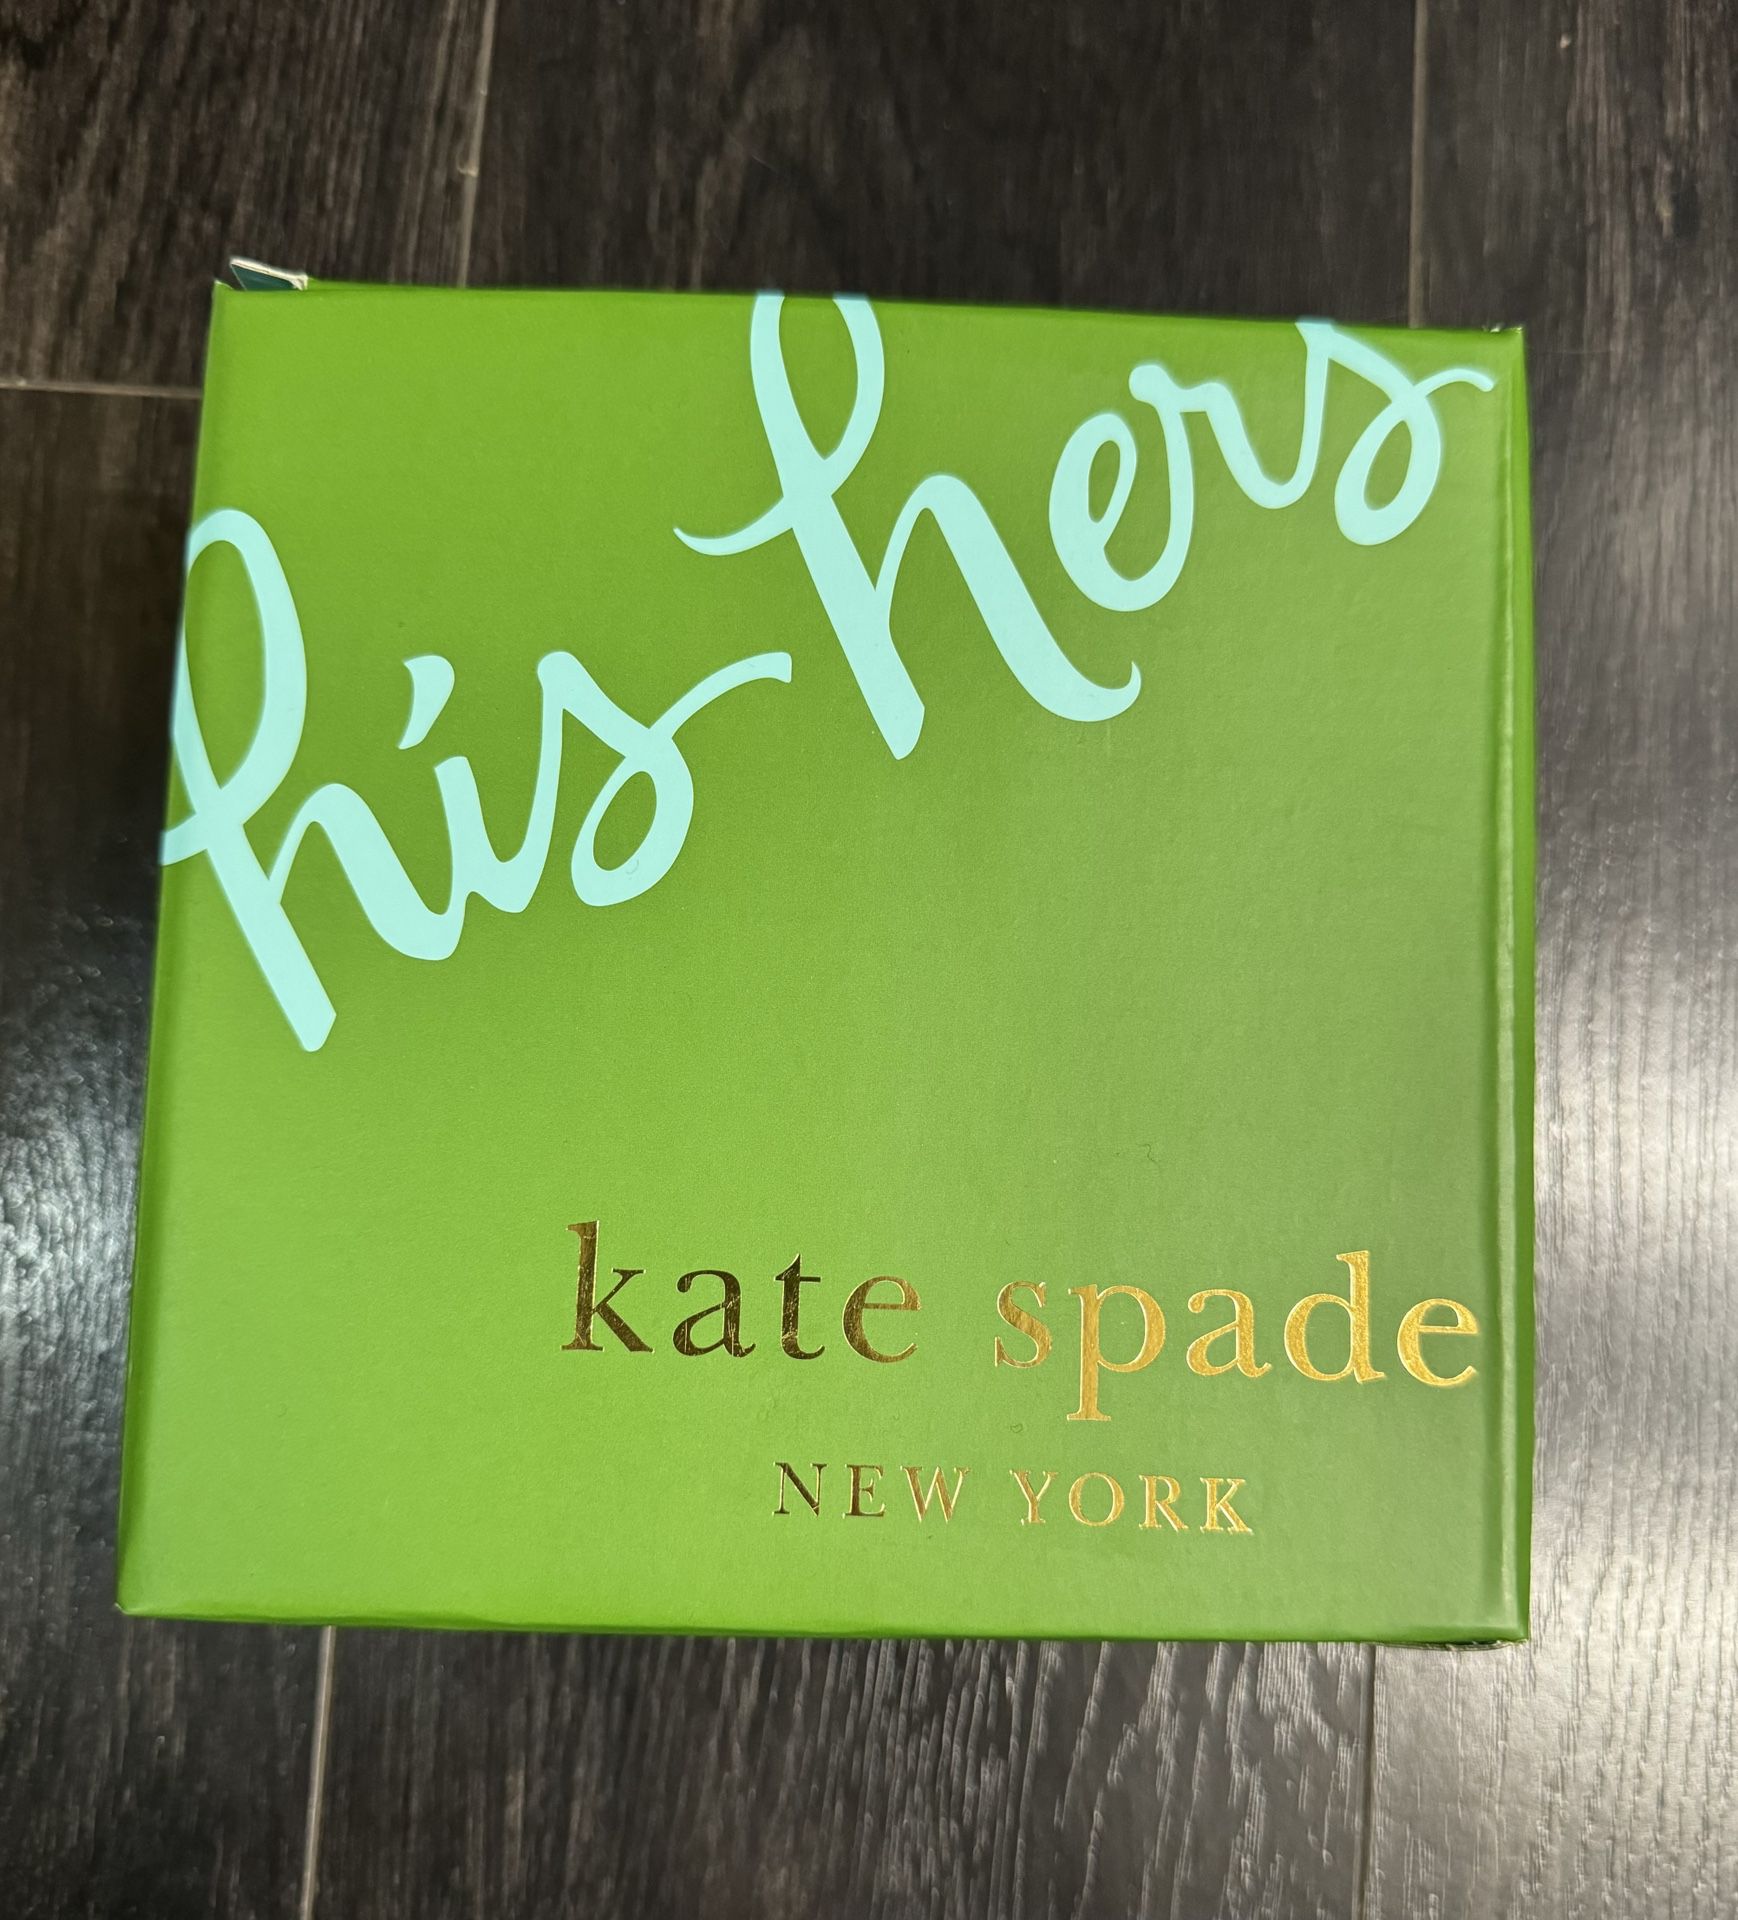 Kate Spade His And Hers Glasses (Brand New)